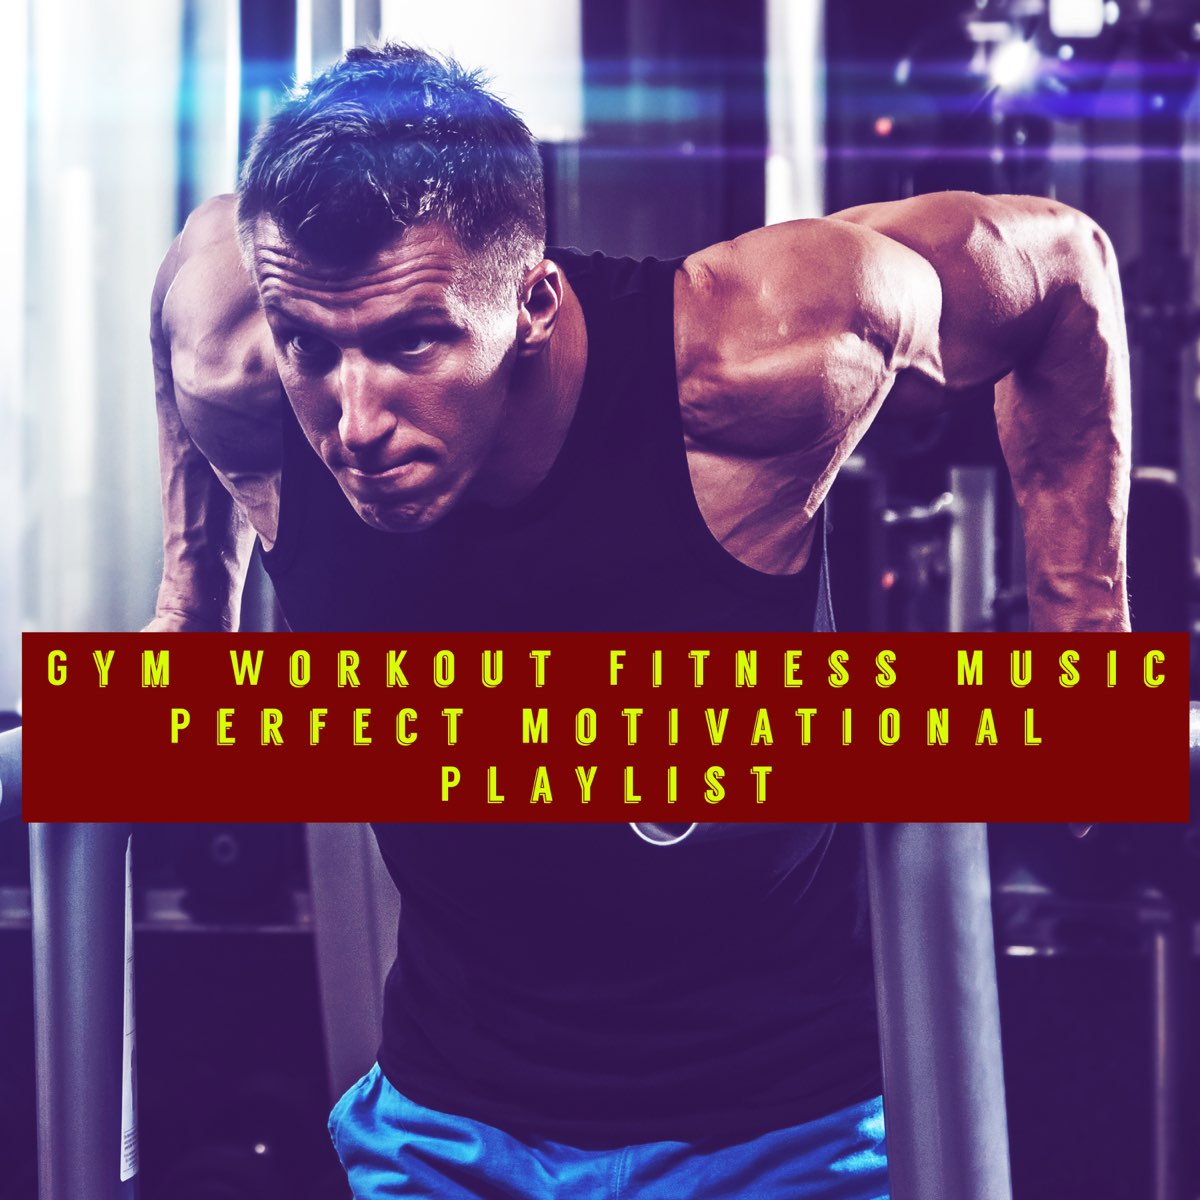 Gym Workout Fitness Music Perfect Motivational Playlist - Album by Work Out  - Apple Music